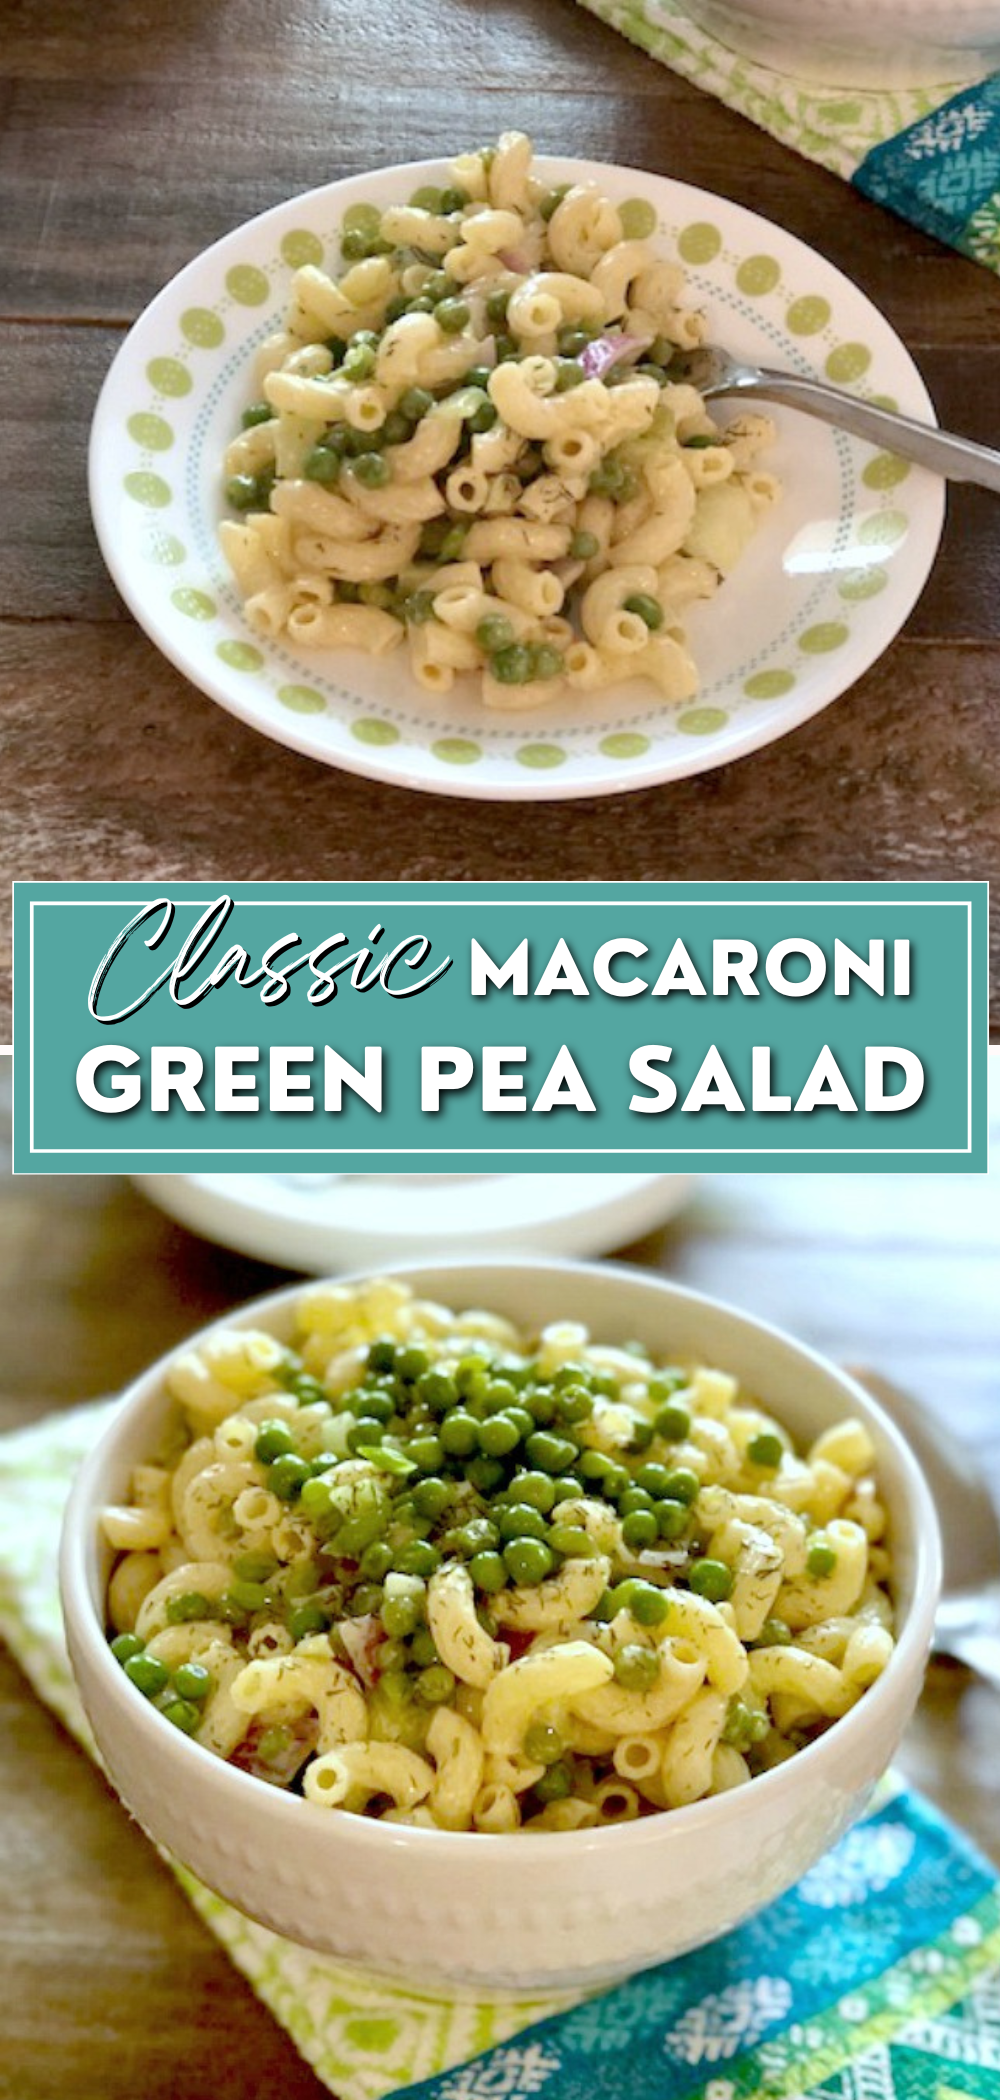 This classic macaroni and grean pea salad is the perfect summer side dish to bring to any pot luck or BBQ. It's always a huge hit with the guests and is bursting with flavor. You can easily double or triple the recipe for a larger crowd. If you want it to be a main meal, you can easily customize it by adding chicken or tuna. This is a great recipe for meal prepped lunches too! via @skinnydesserts